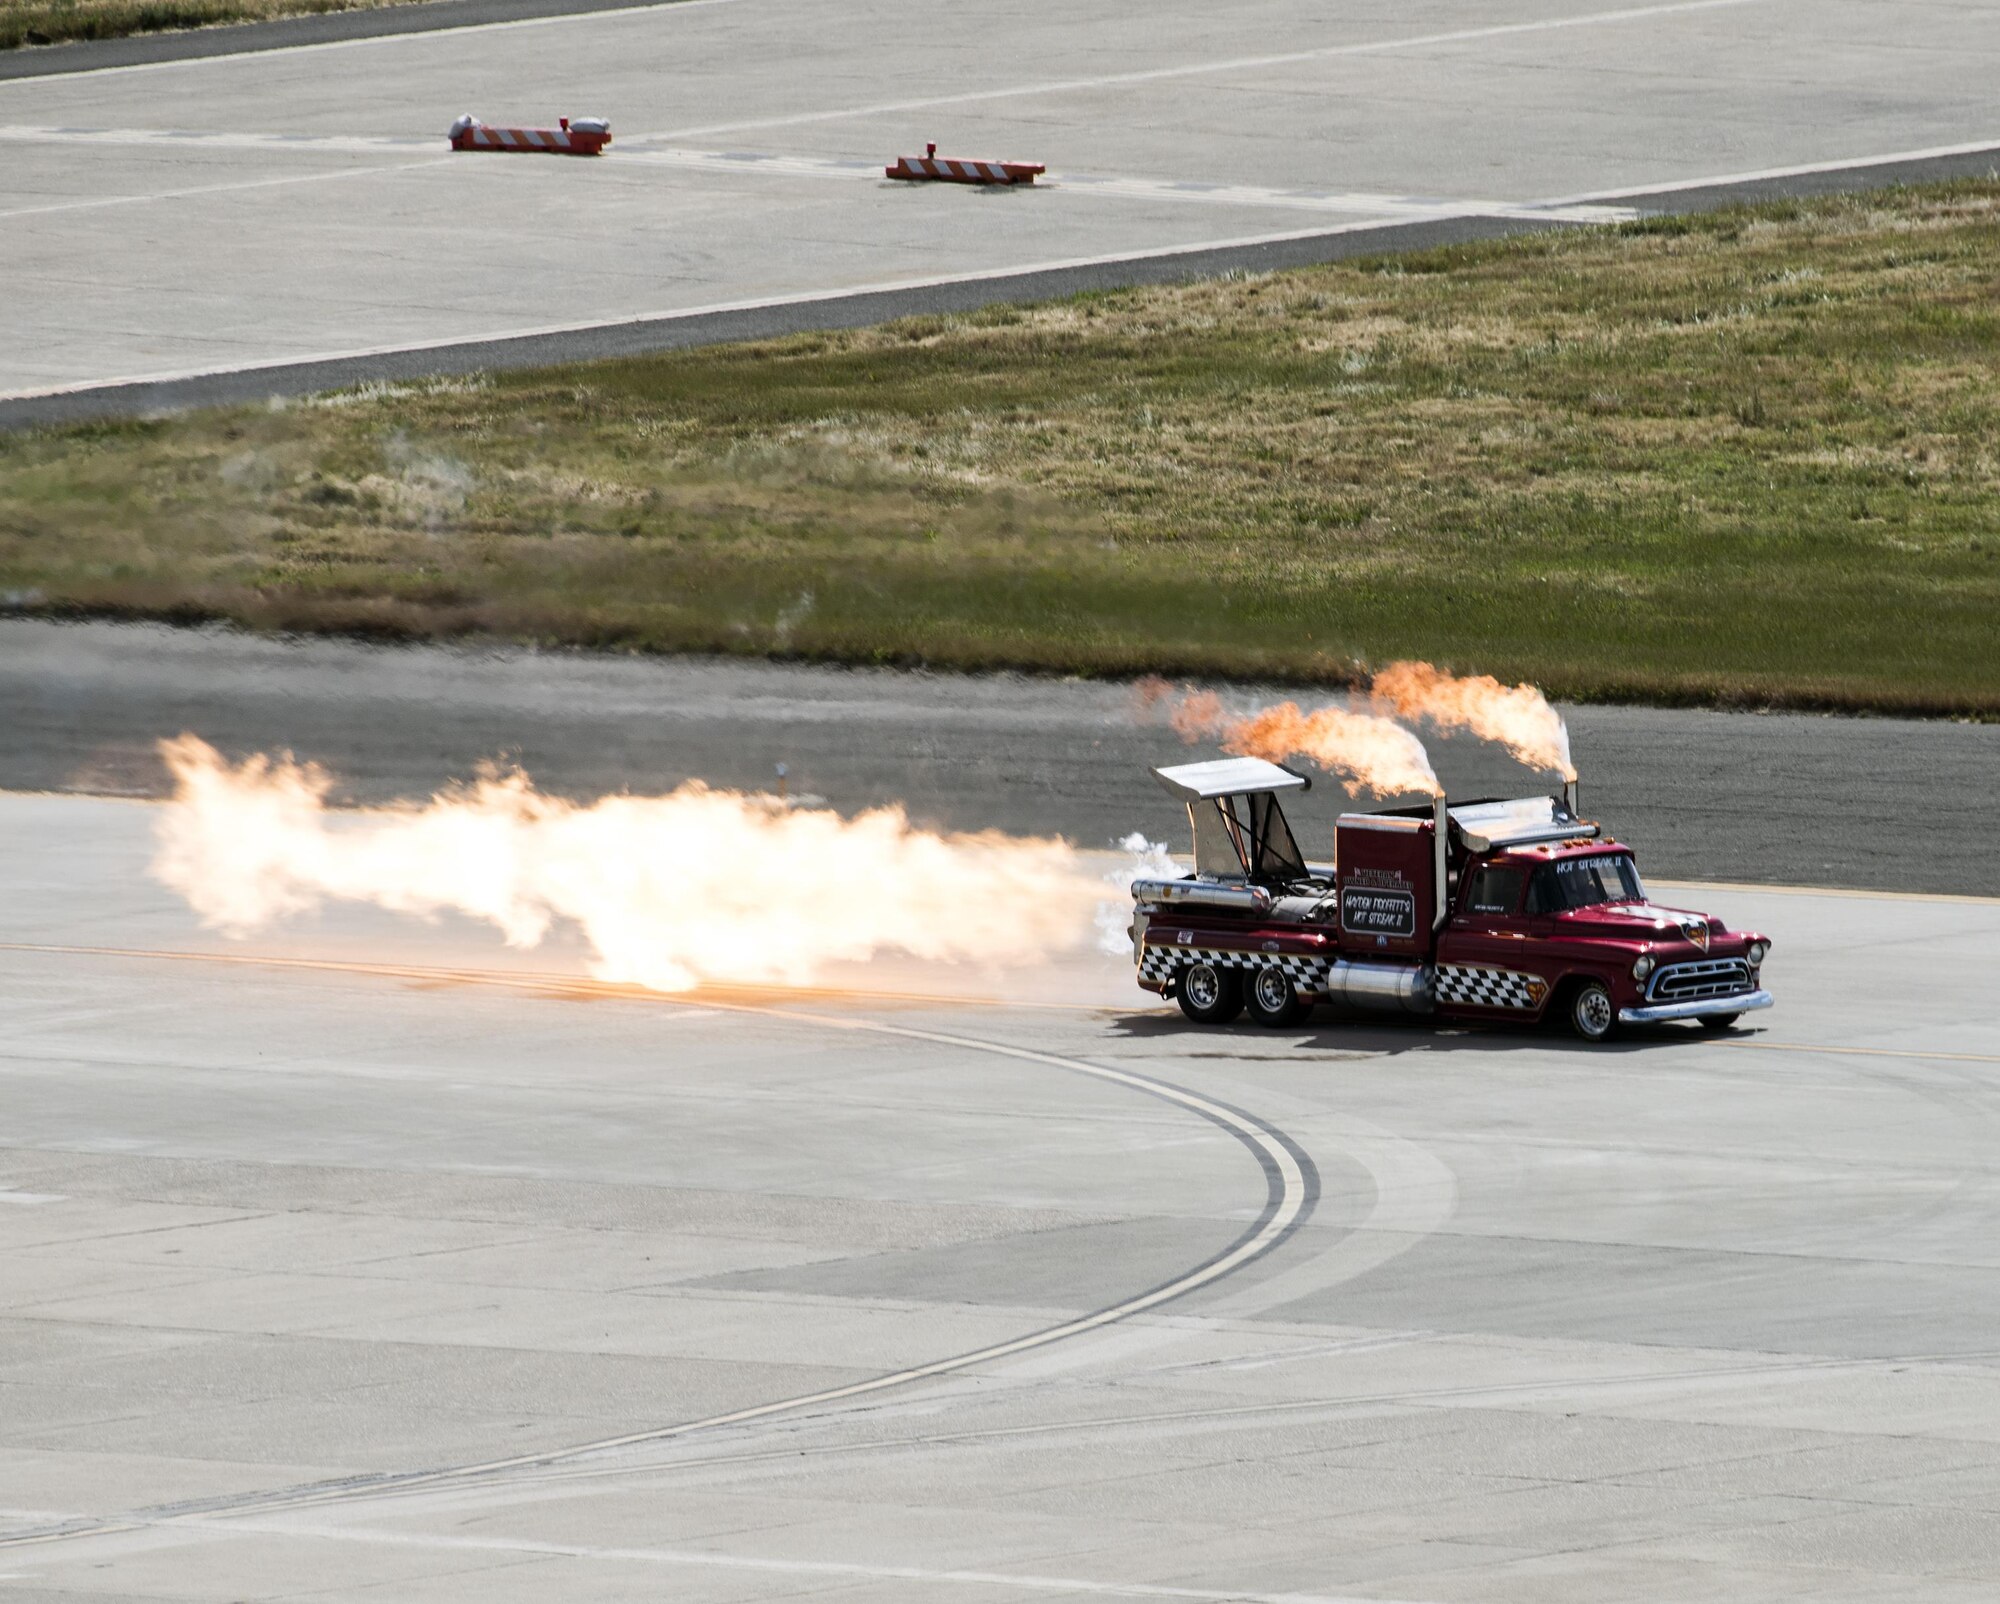 The Smoke and Thunder Jet Truck peforms at the Wings Over Solano Air Show at Travis Air Force Base, Calif., May 6, 2017. The two day event featured performances by the U.S. Air Force Thunderbirds aerial demonstration team, U.S. Army Golden Knights parachute team, flyovers and static displays. 
(U.S. Air Force photo by David Cushman)